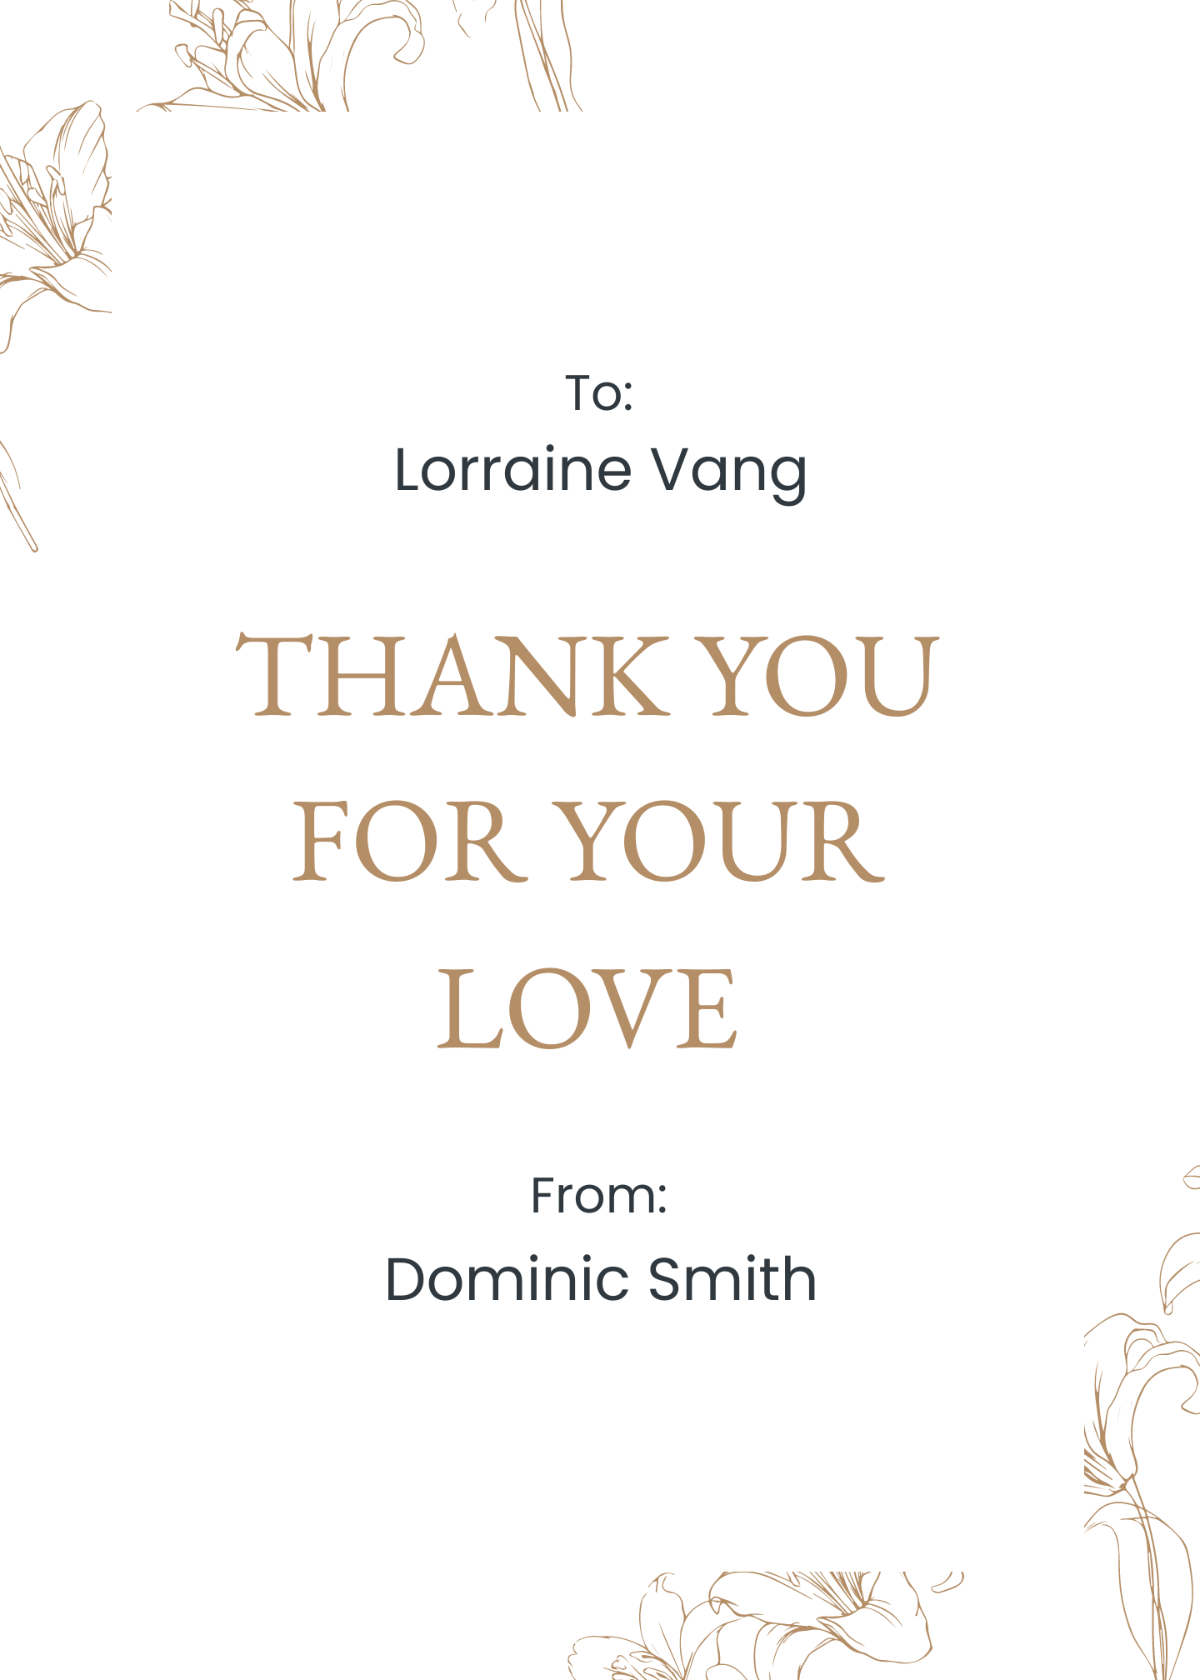 Elegant Funeral Thank You Card Template